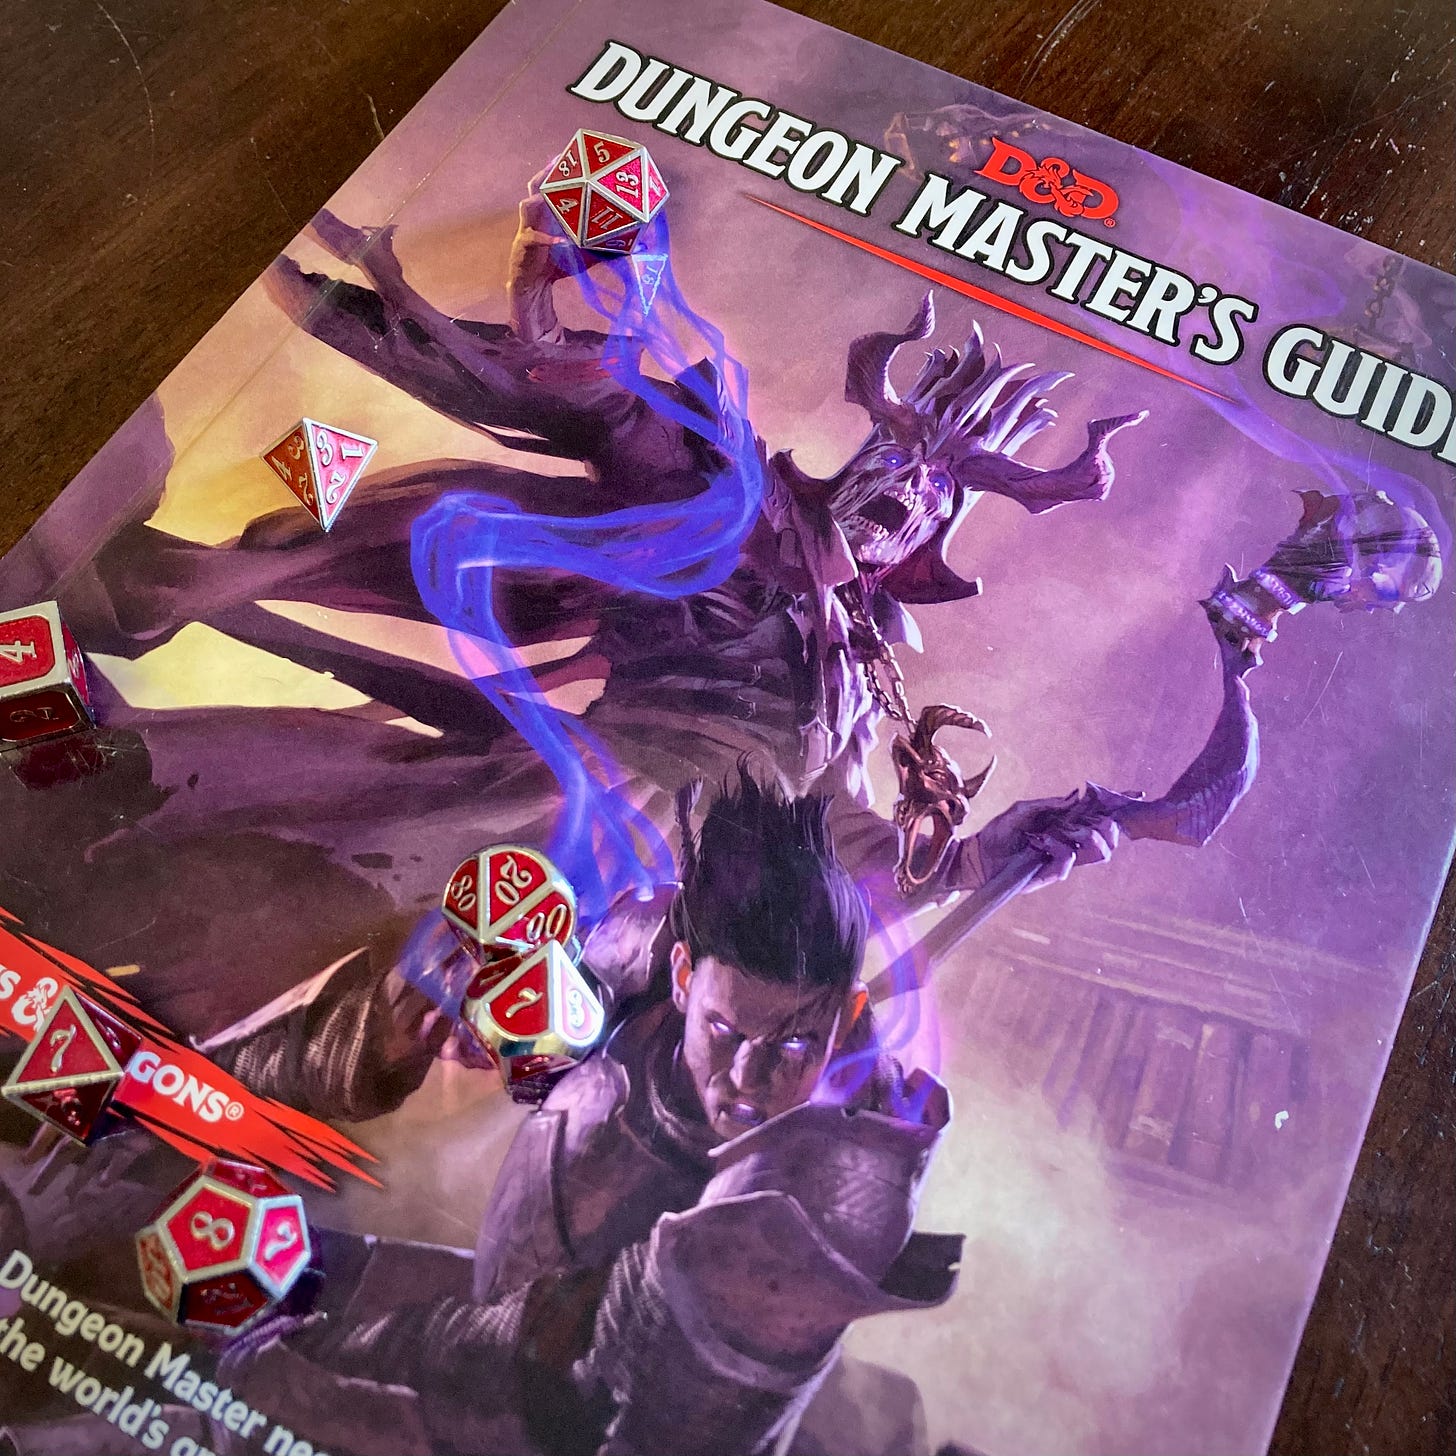 picture of the dungeon master's guide with dice resting on the cover